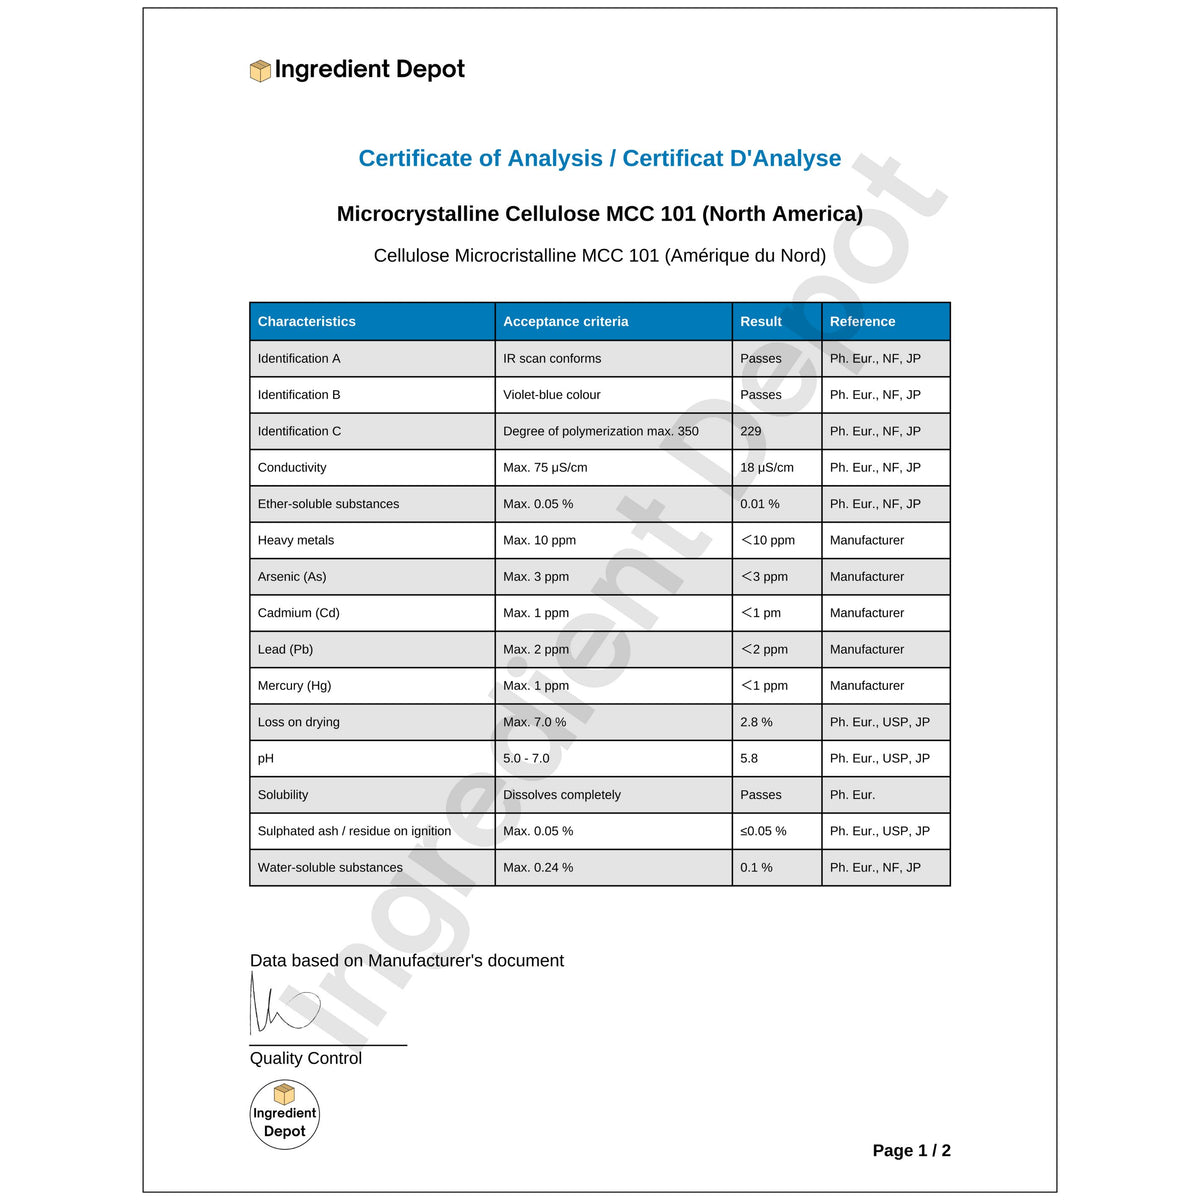 MCC 101 Microcrystalline Cellulose 20 kgs from North America COA Page 1 of 2